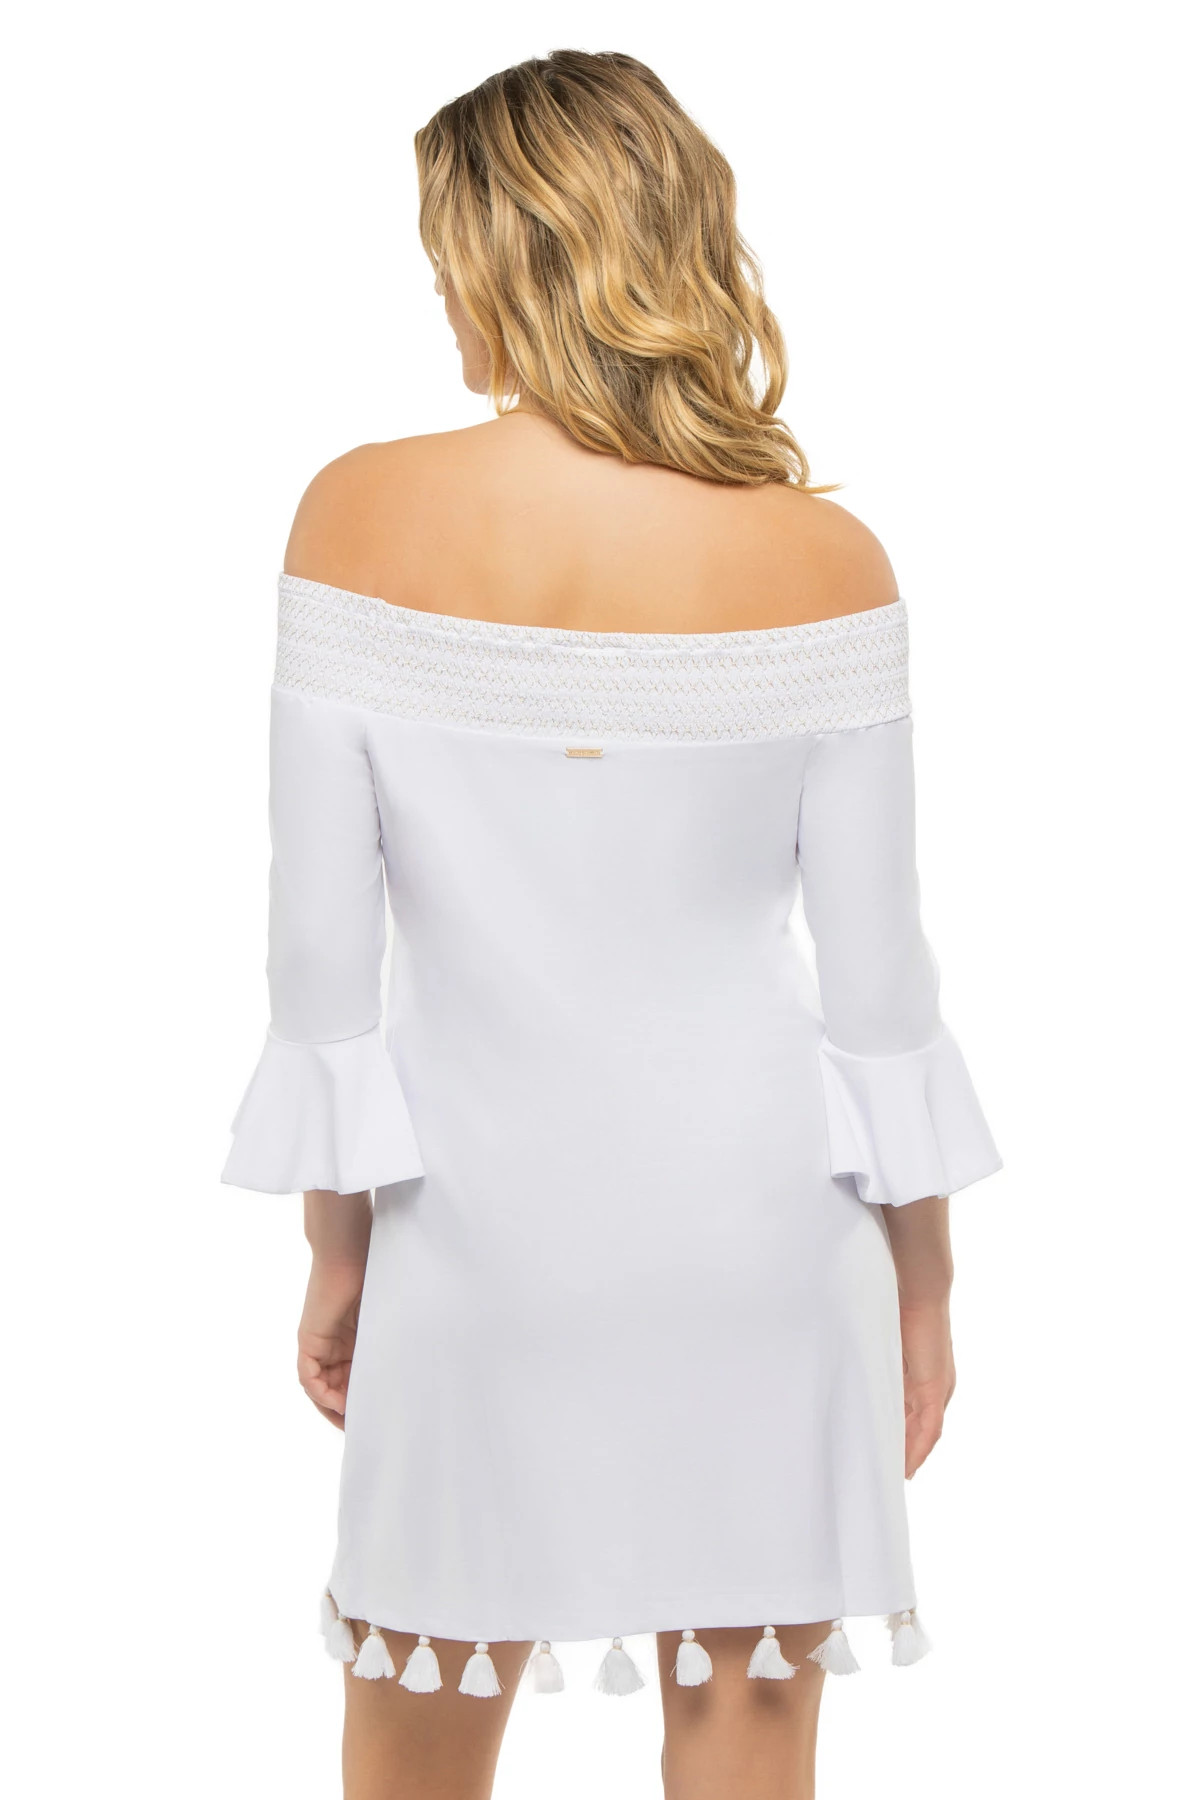 WHITE Embroidered Off The Shoulder Mini Dress image number 2